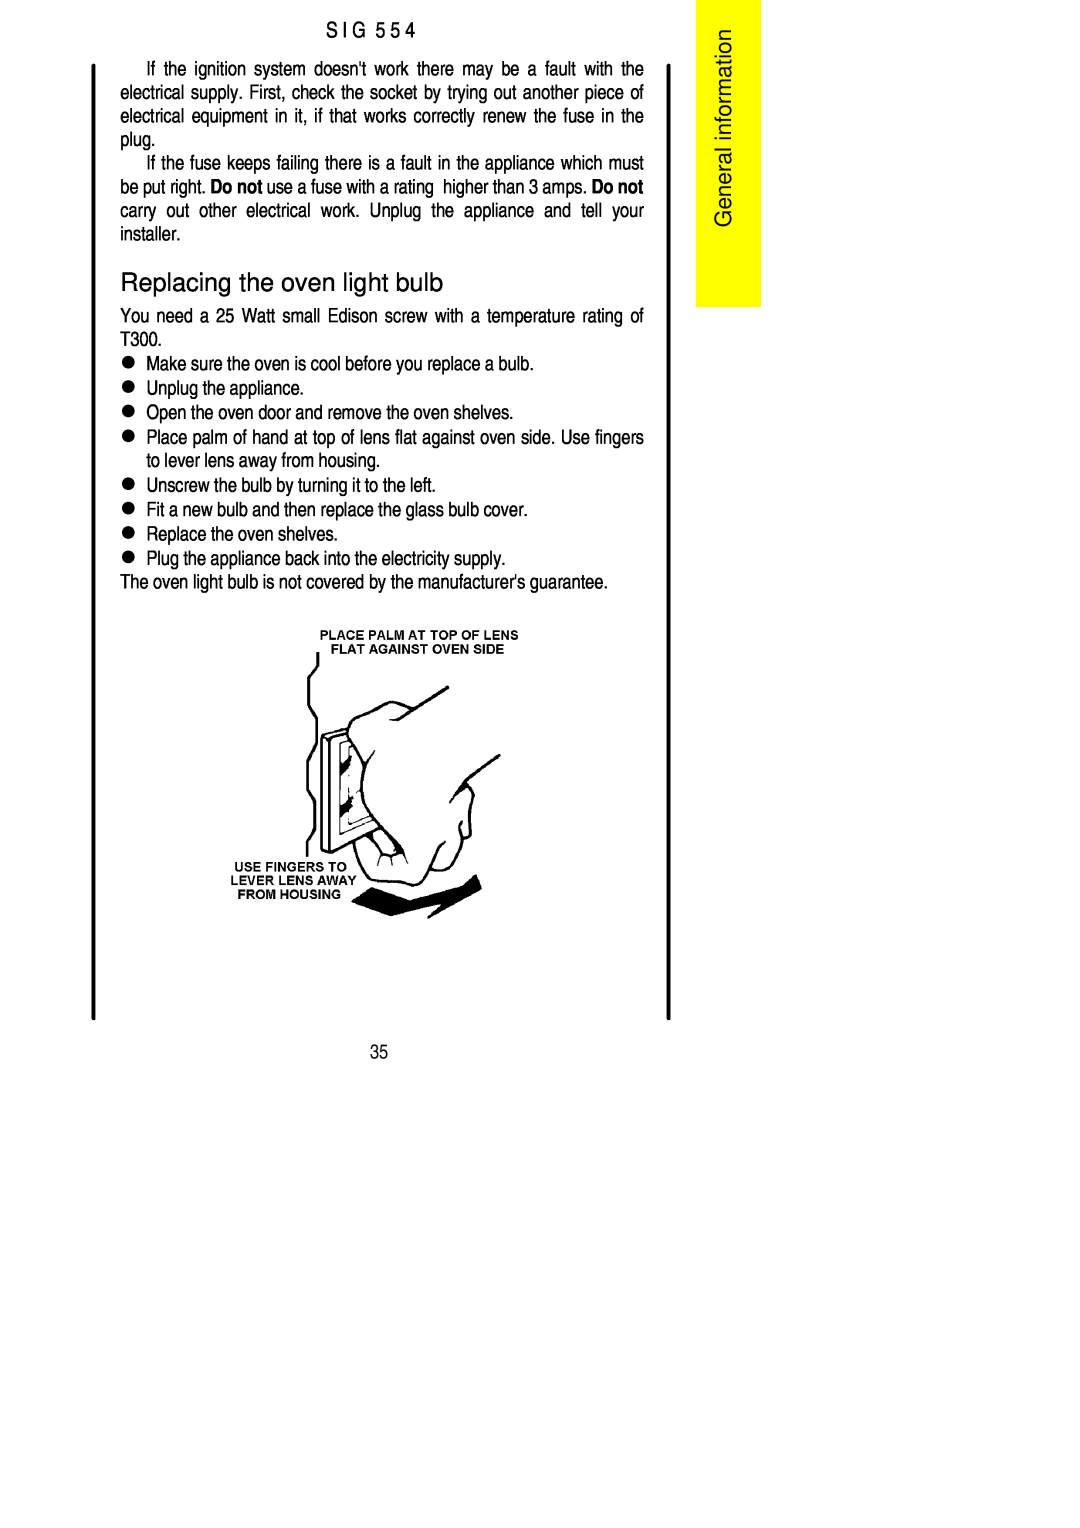 Parkinson Cowan SIG 554 installation instructions Replacing the oven light bulb, General information, S I G 5 5 